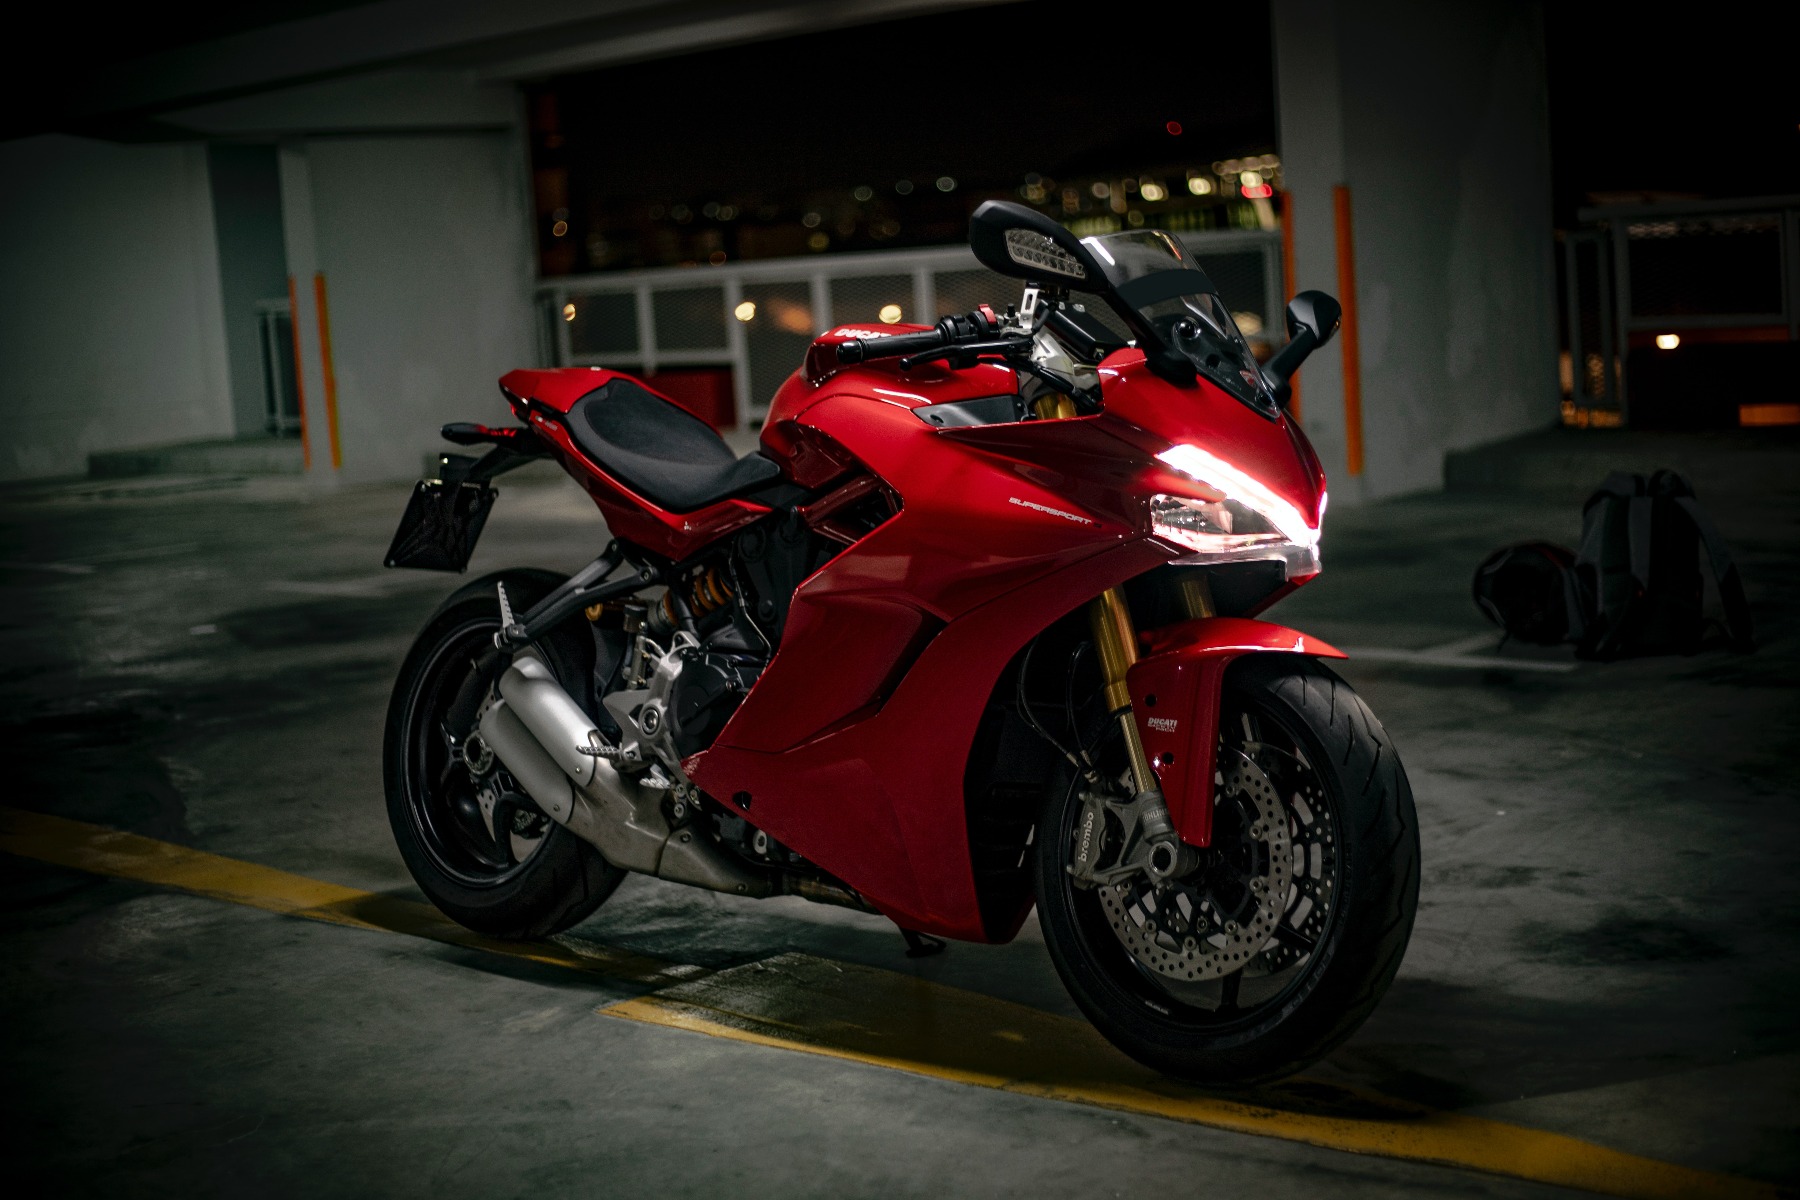 A red and black motorcycle sits in a parking garage at night.